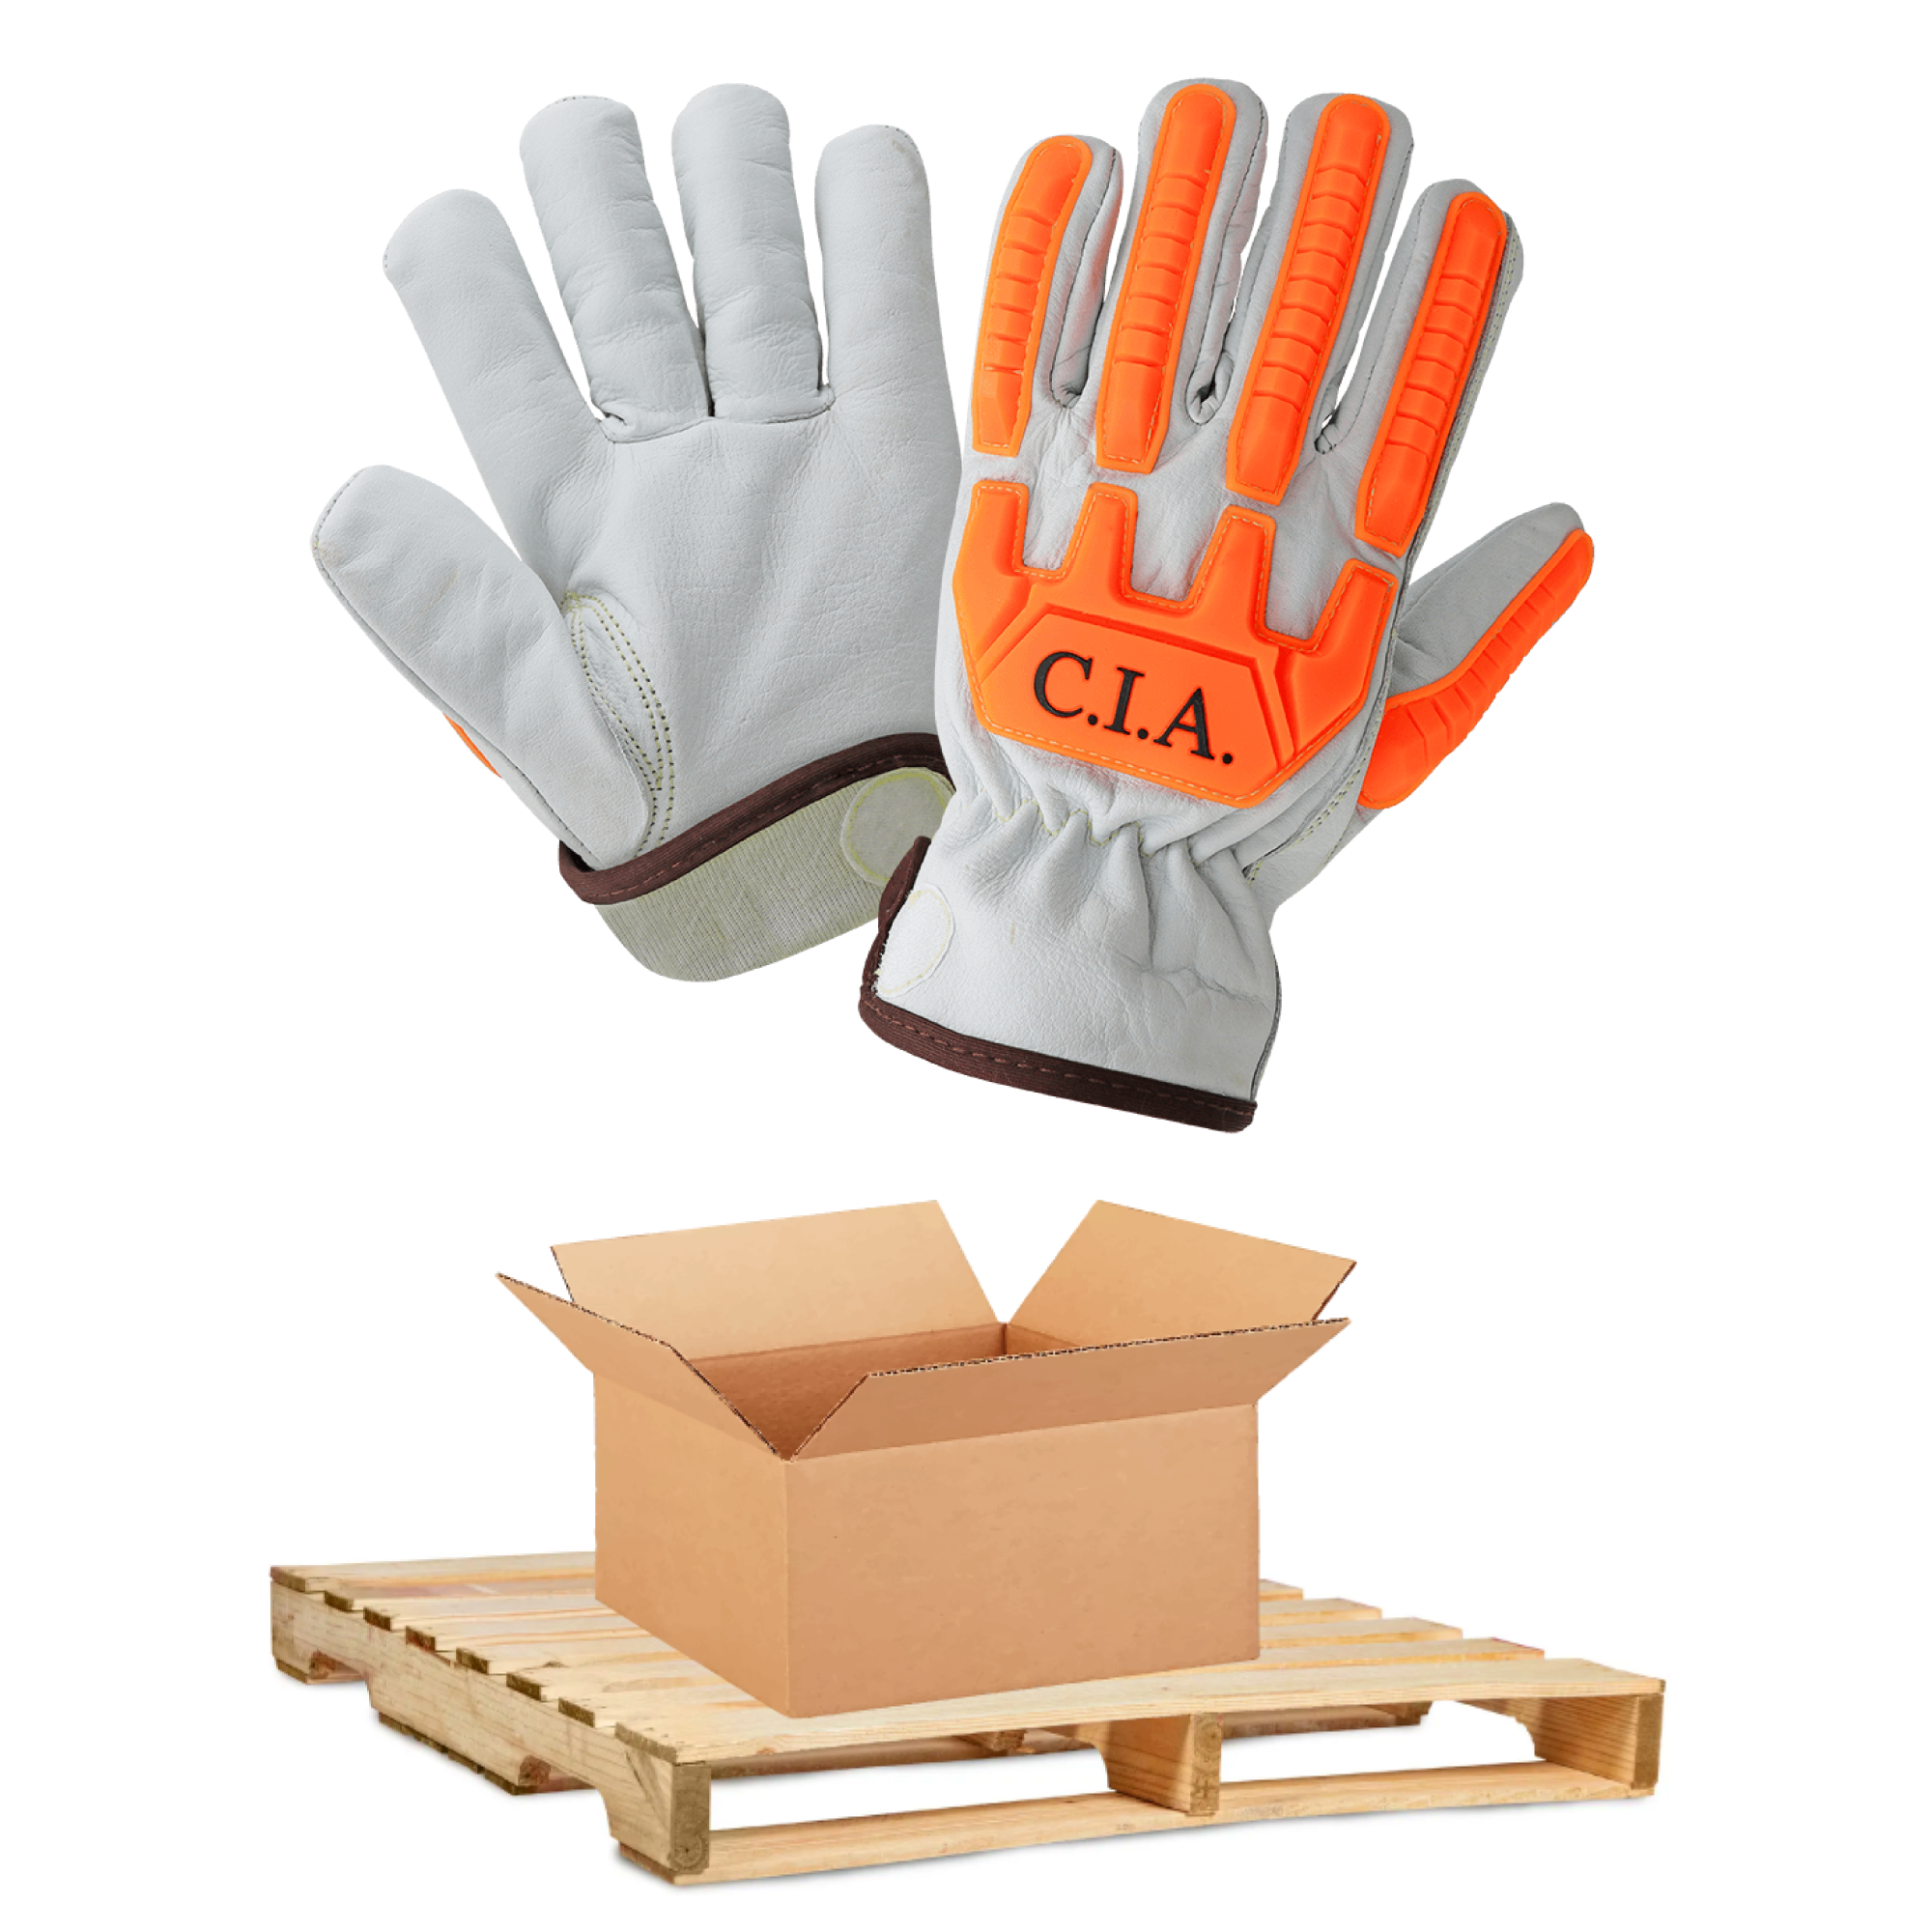 BULK, Global Glove & Safety CIA7700 High-Visibility Cut and Impact Resistant Buffalo Leather Drivers, Cut A7 (360 pairs)